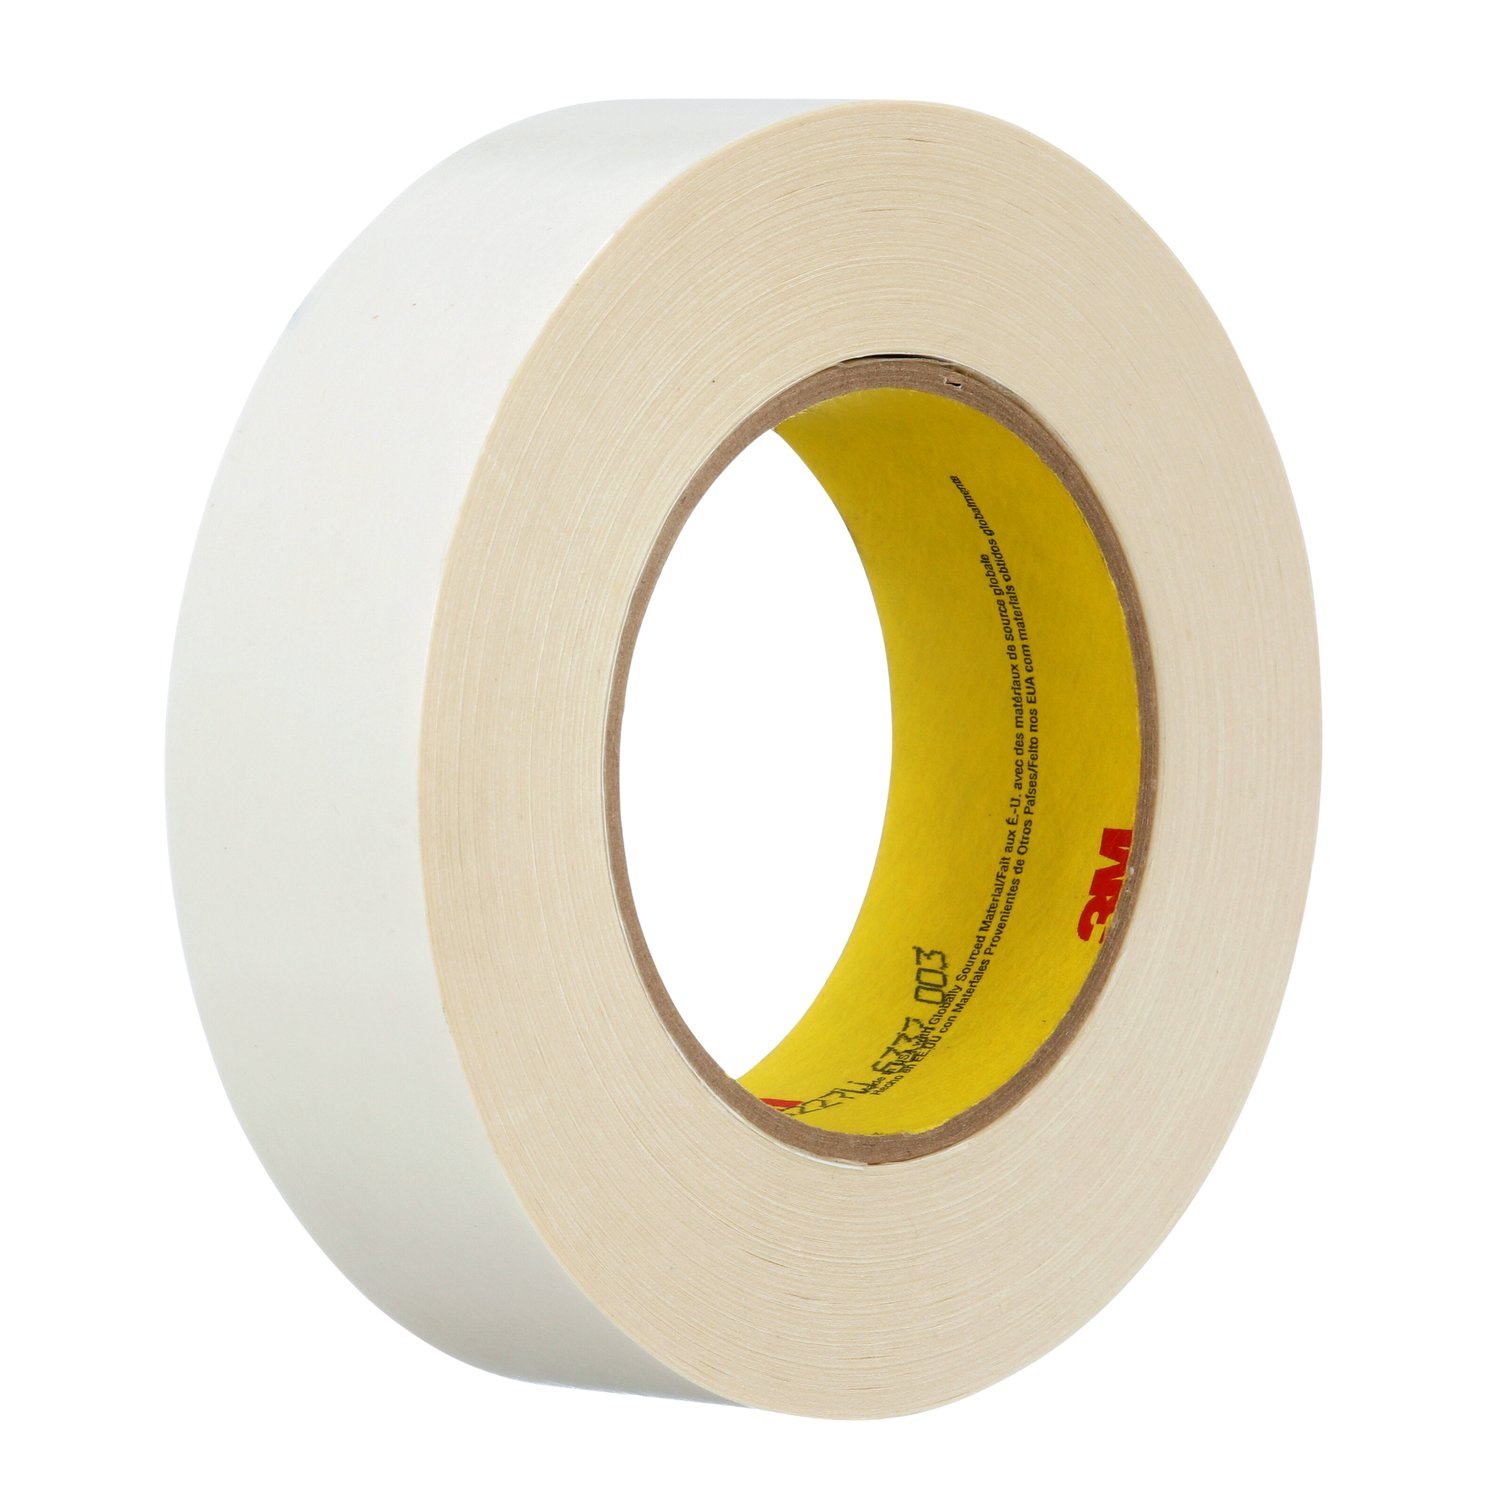 7100028149 - 3M Repulpable Double Coated Tape R3227, White, 36 mm x 55 m, 3.5 mil,
24 rolls per case